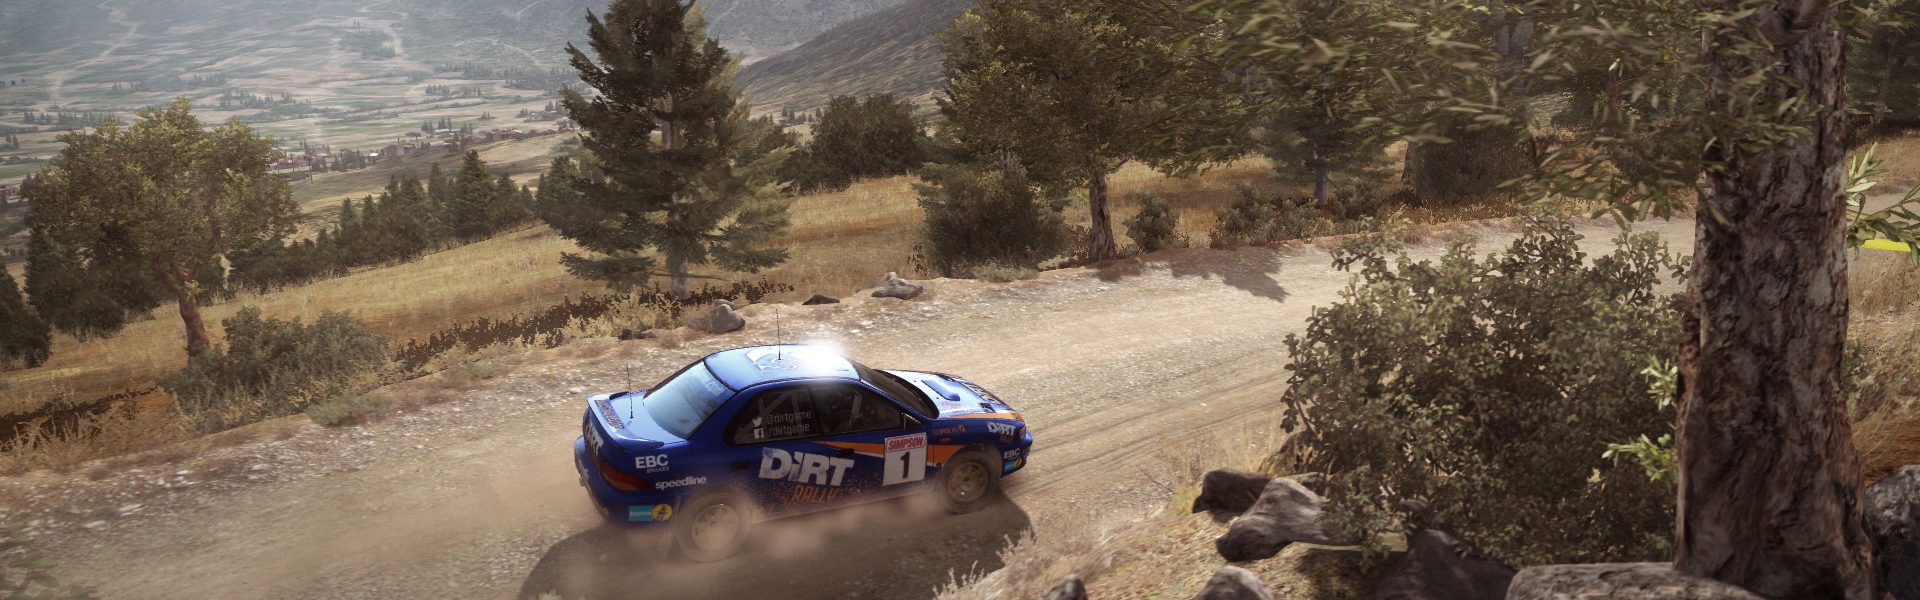 psvr dirt rally with thrustmaster